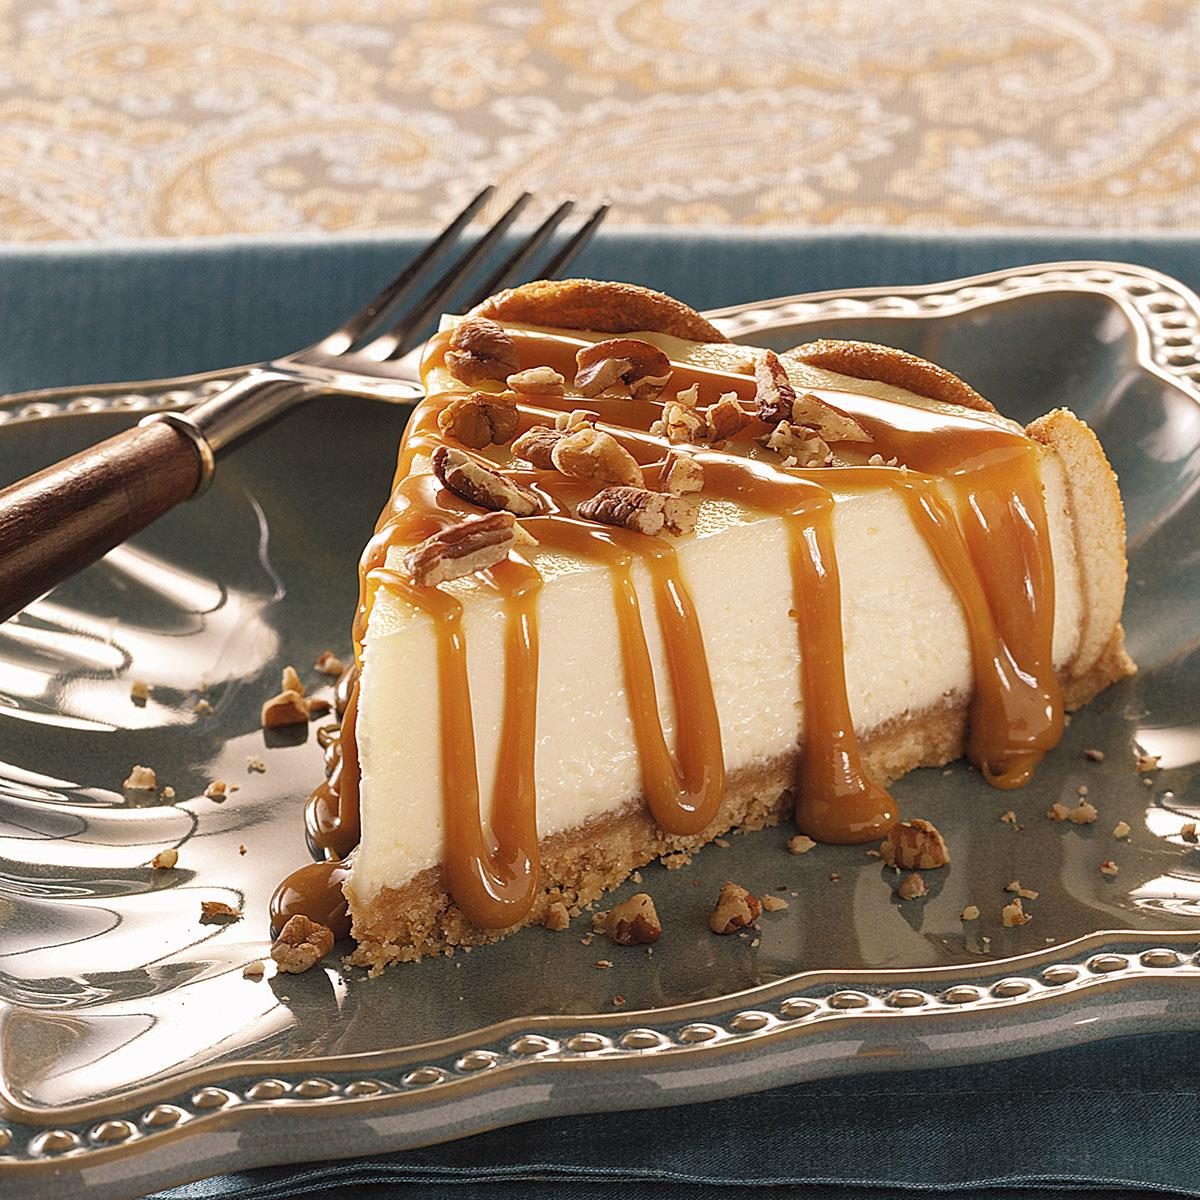 Caramel Praline Topped Cheesecake Exps34790 Cod2043879a07 08 1bc Rms 3